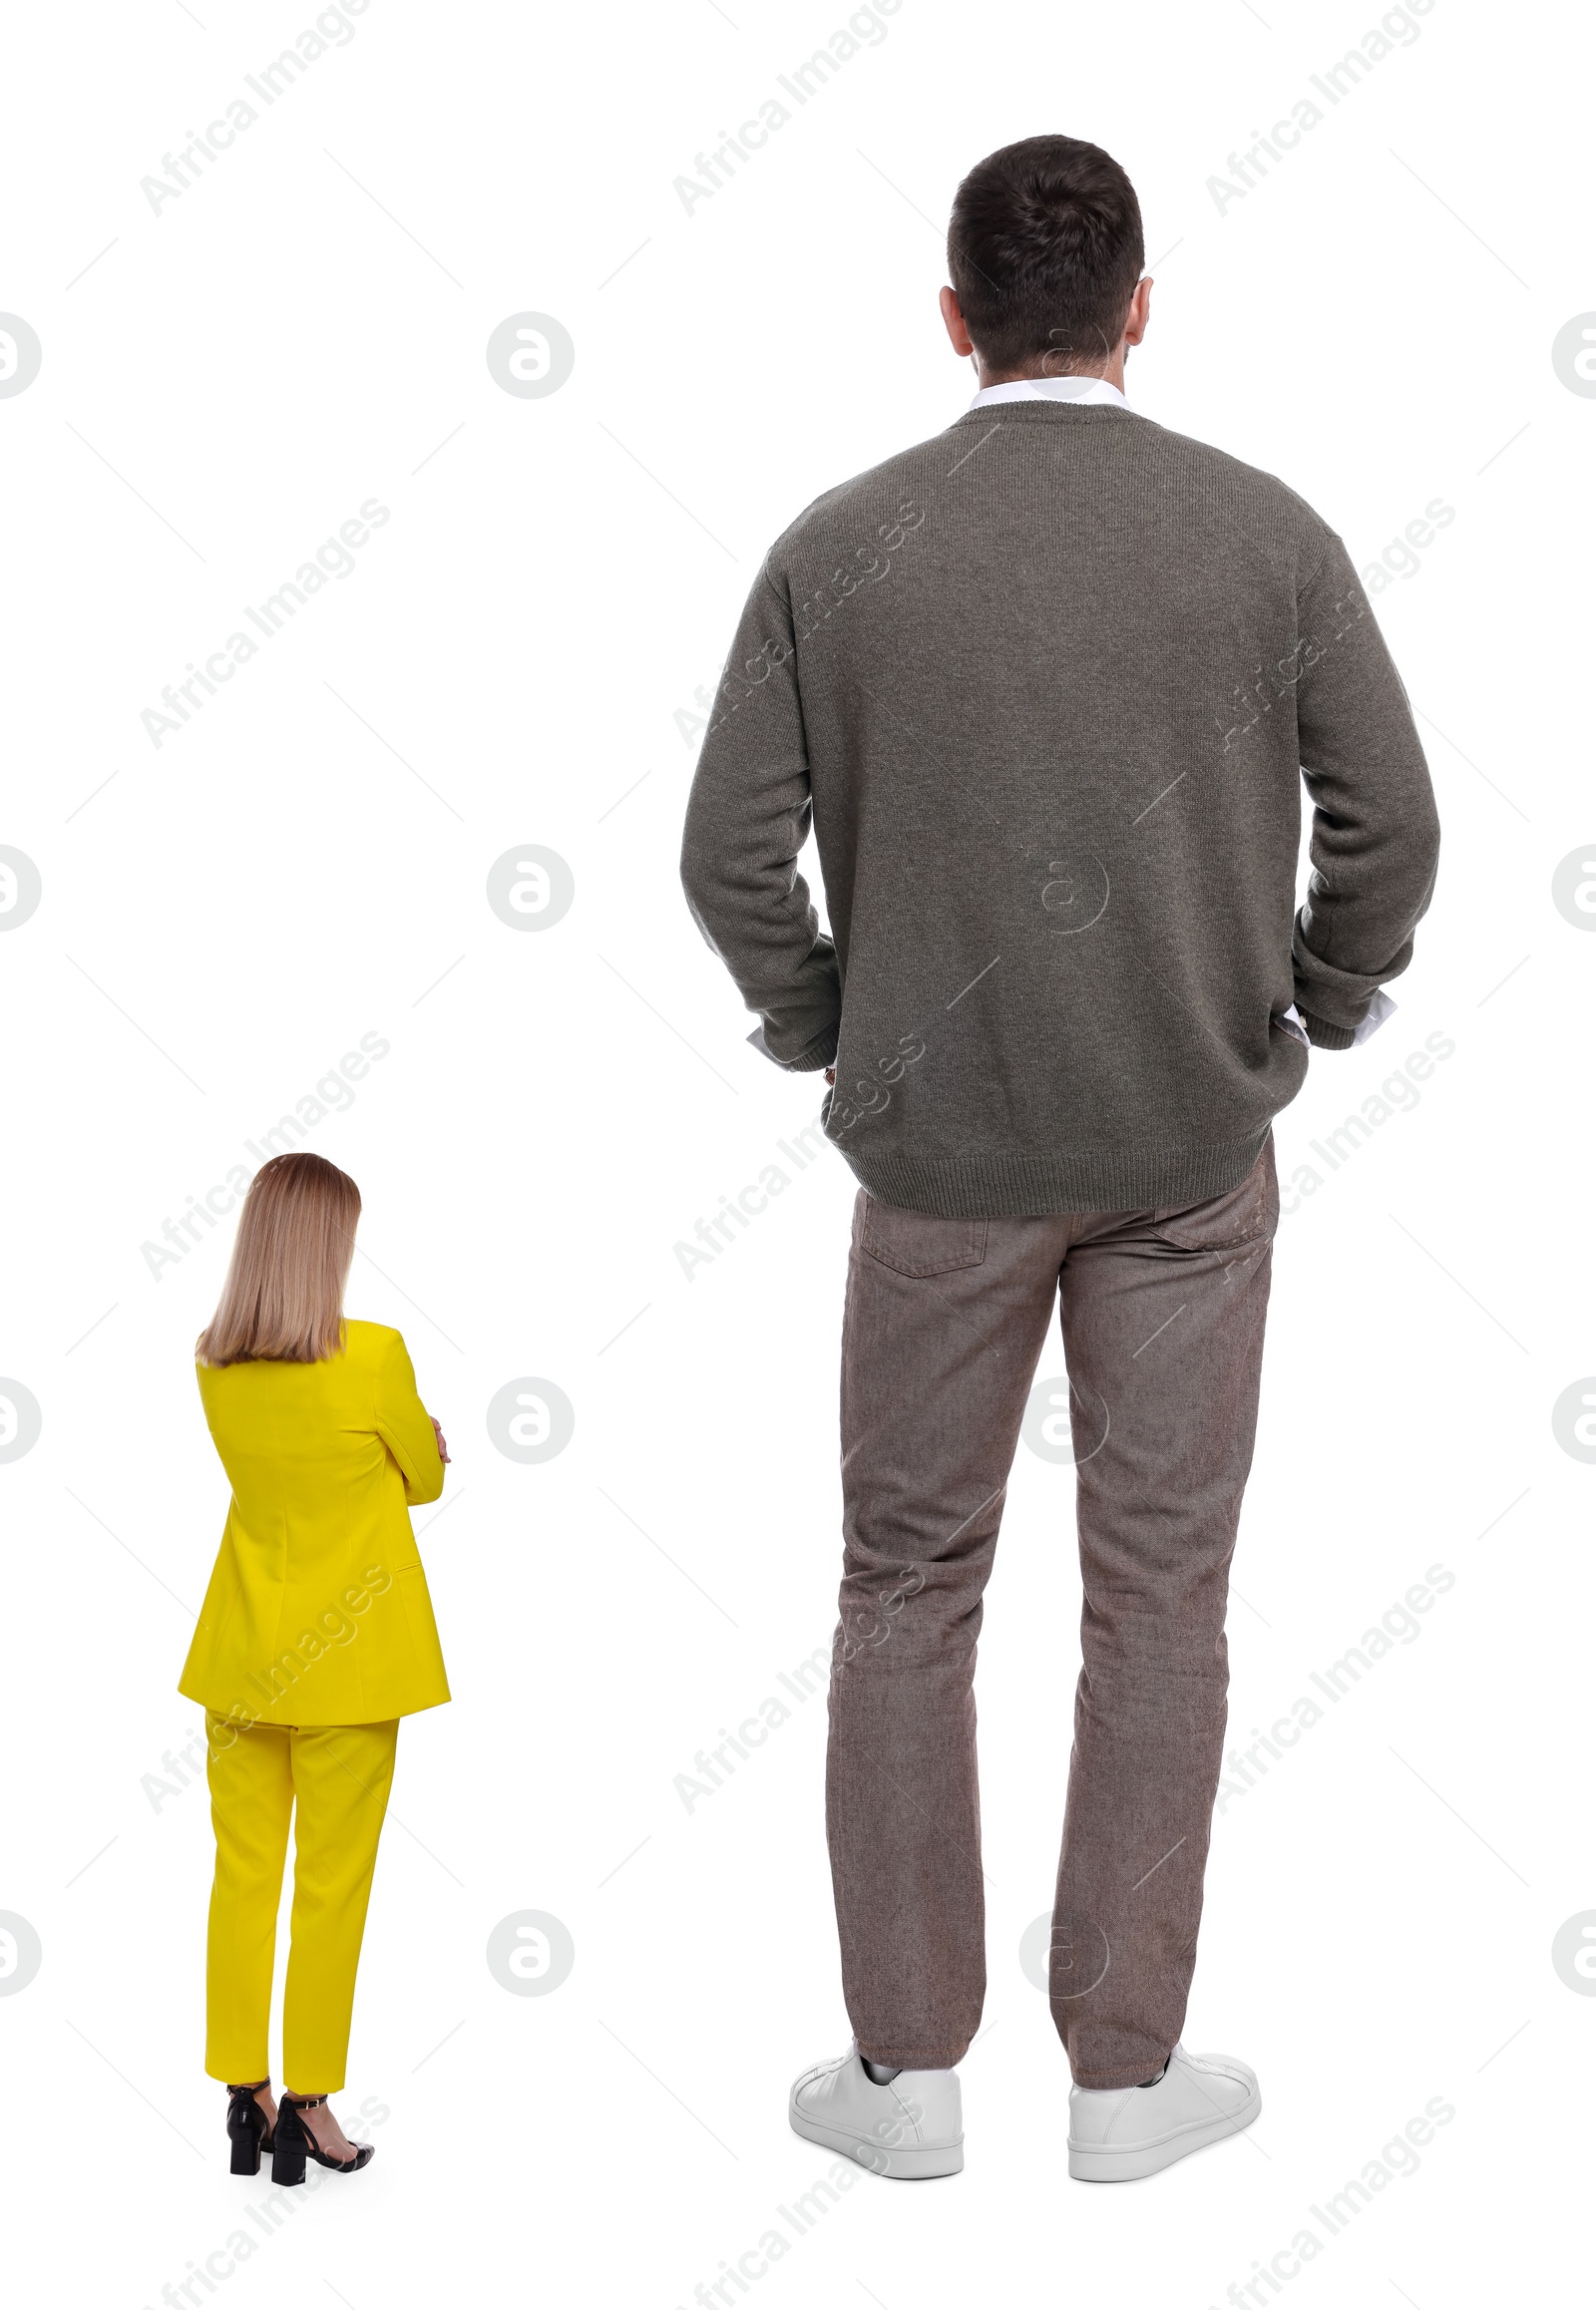 Image of Big man and small woman on white background, back view